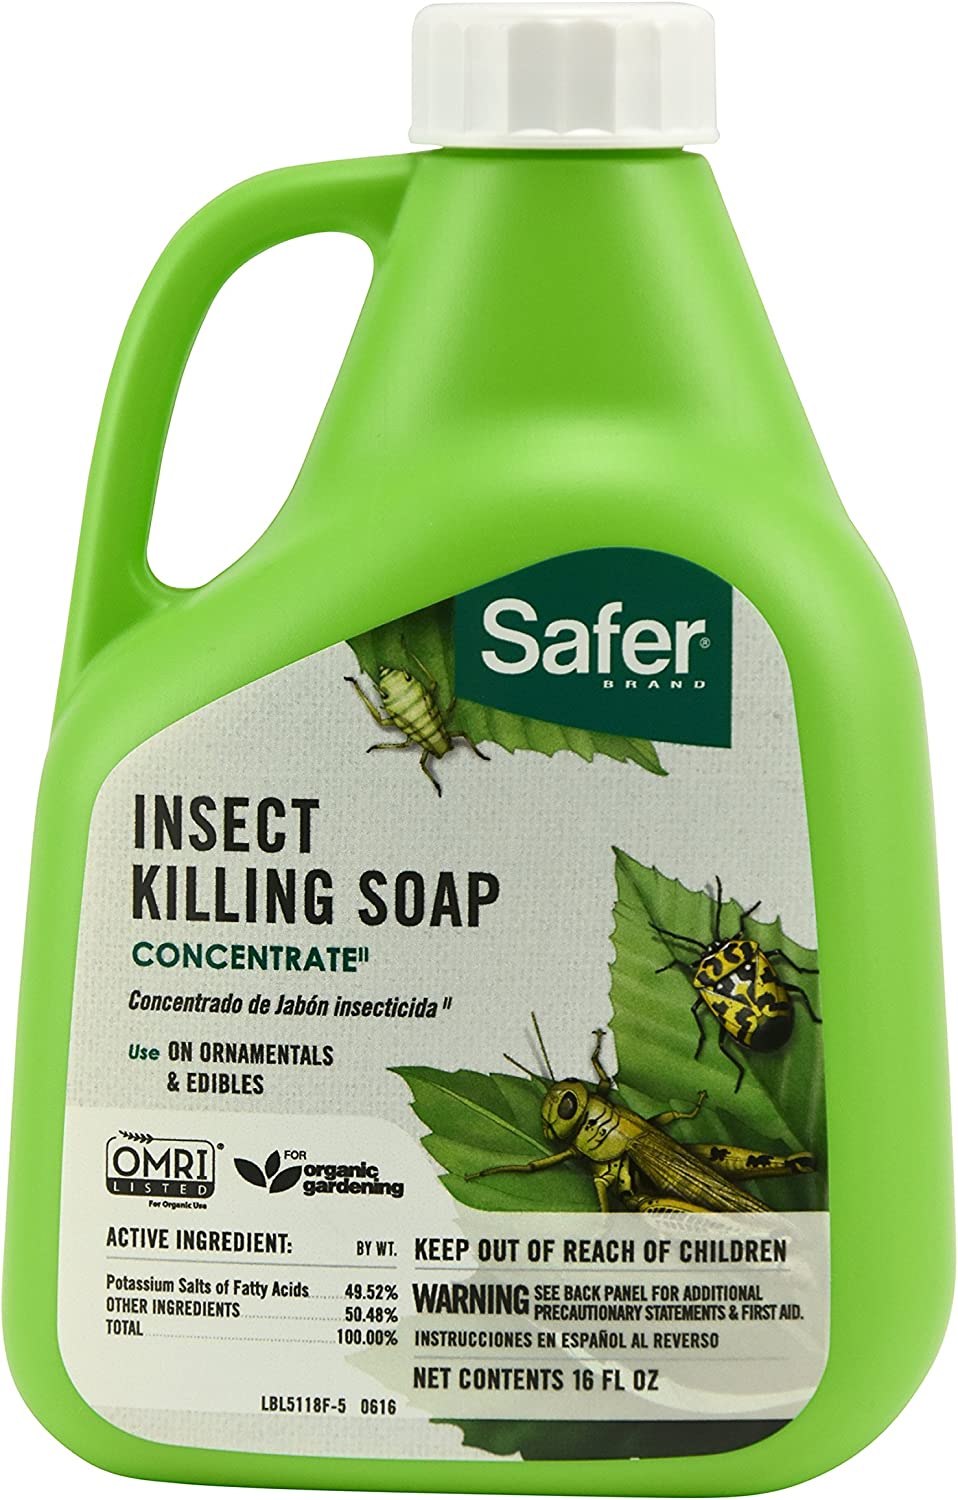 Safer 5118-6 Insect Killing Soap Concentrate - [...]